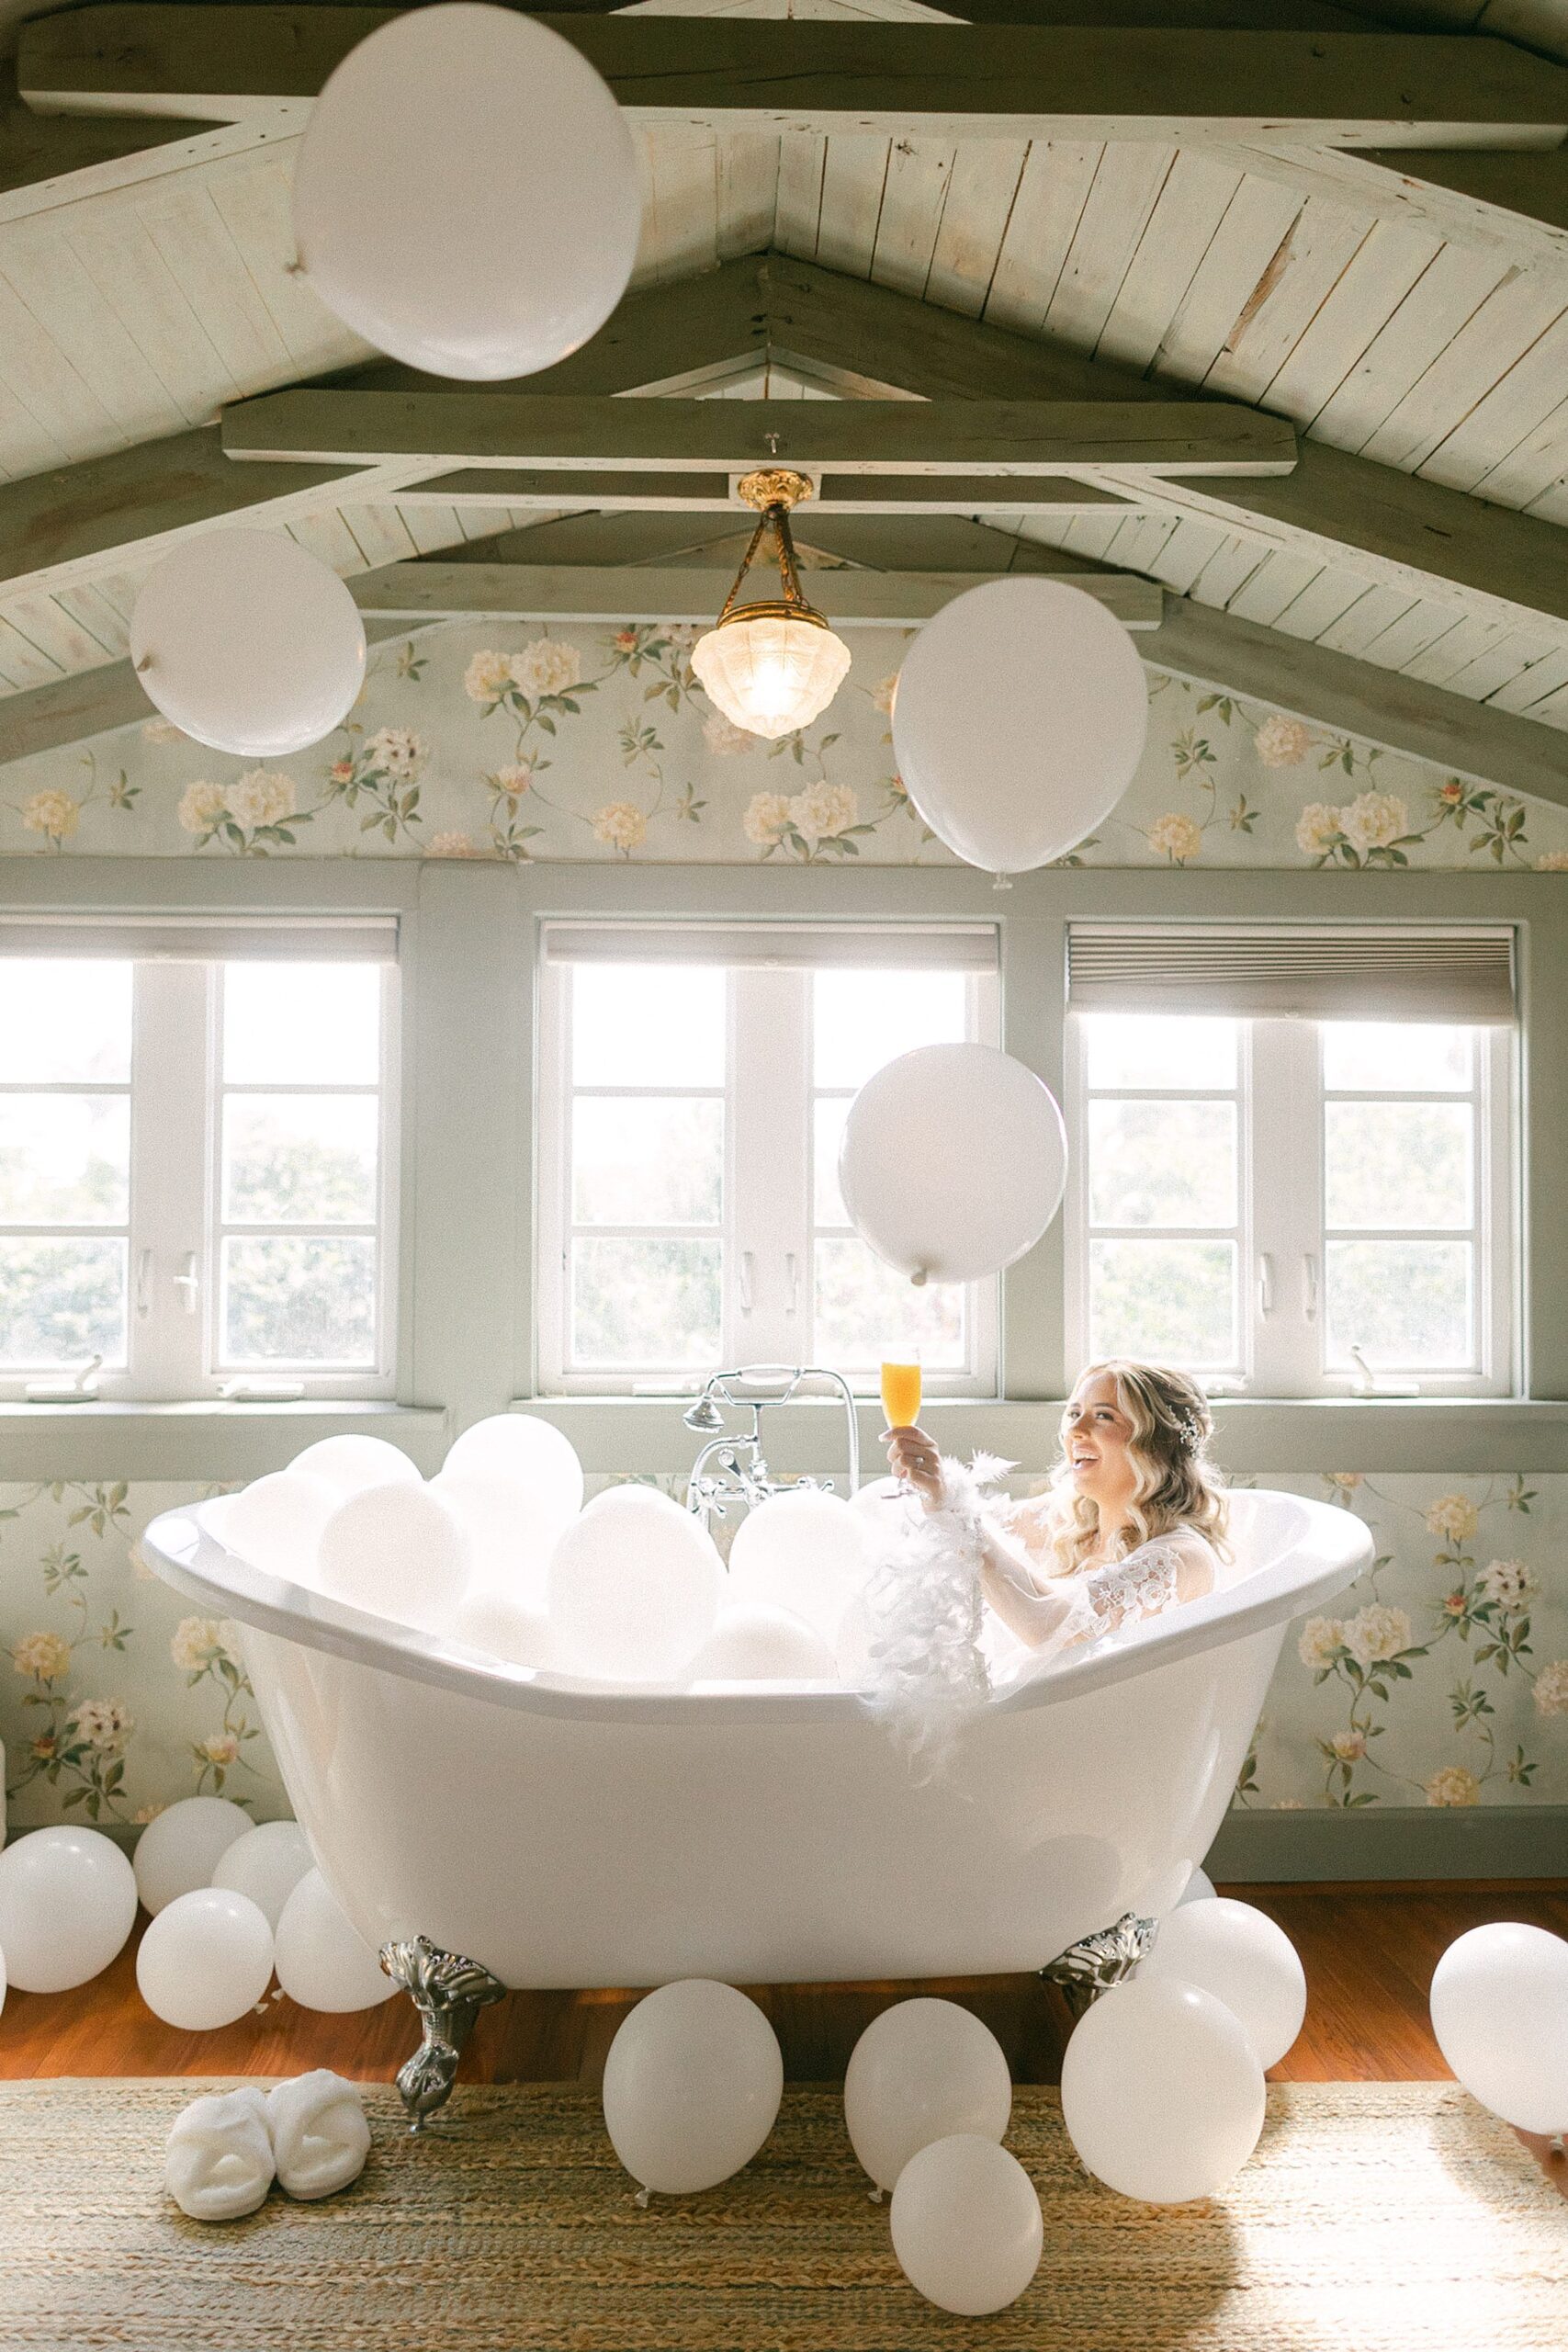 Bride in bath tub with an orange mimosa and white balloons in the air.